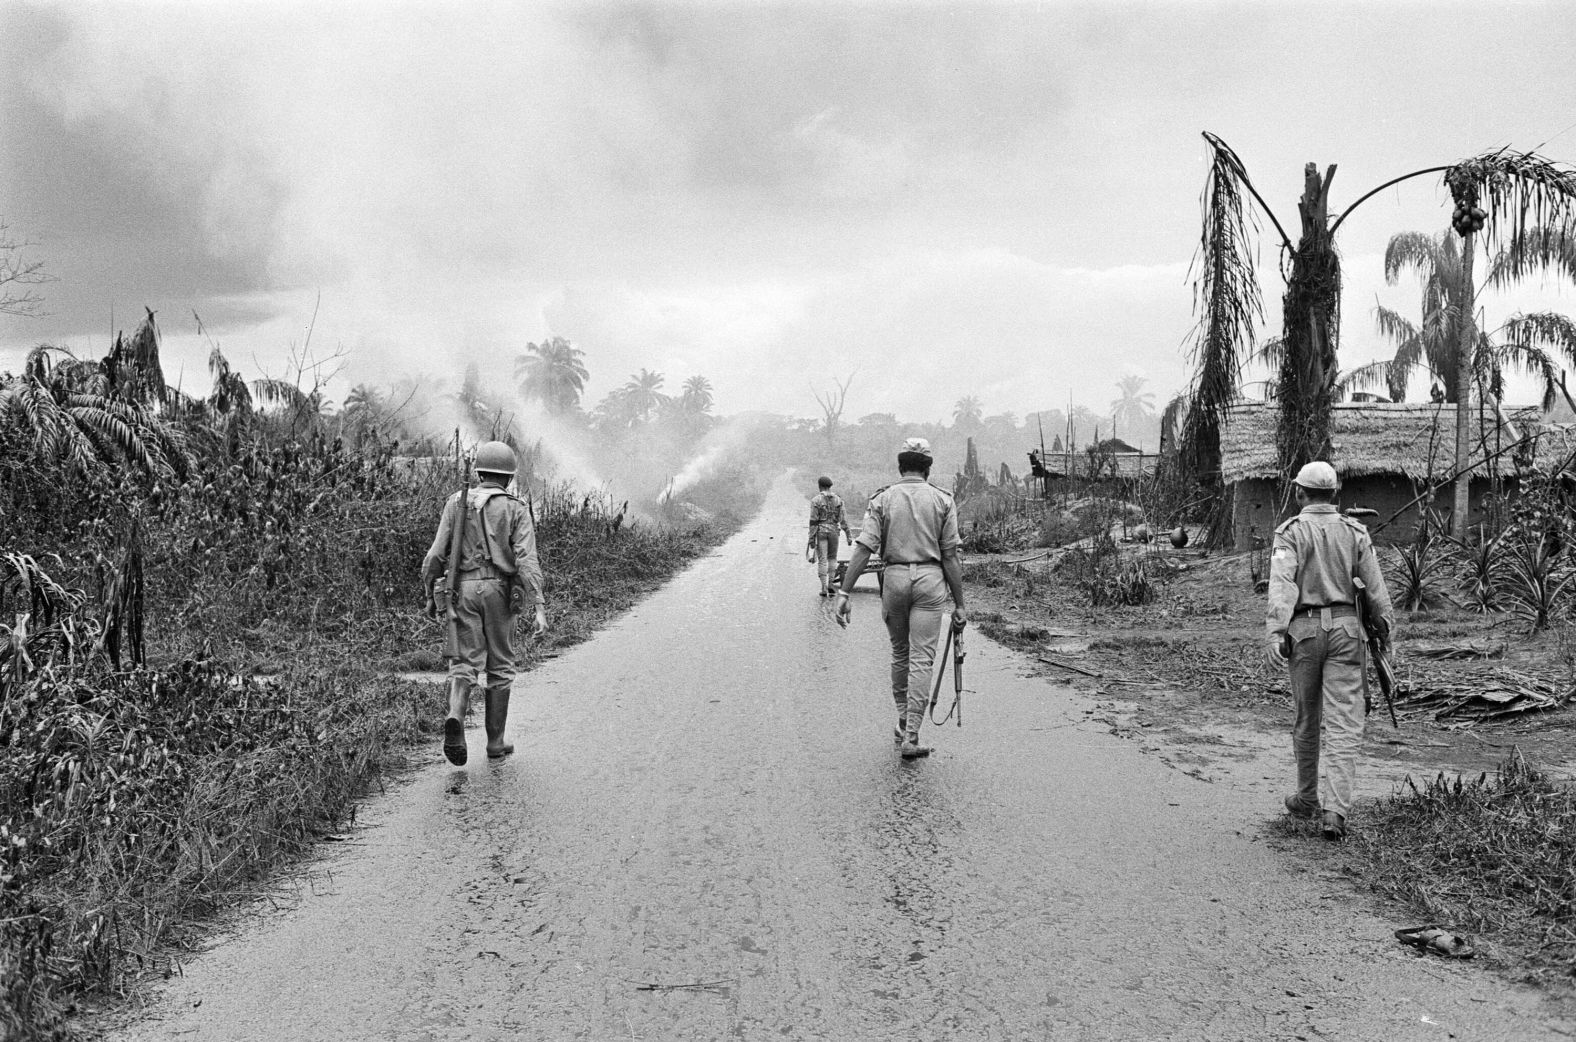 Biafran soldiers advance towards a Nigerian army position in June 1968.